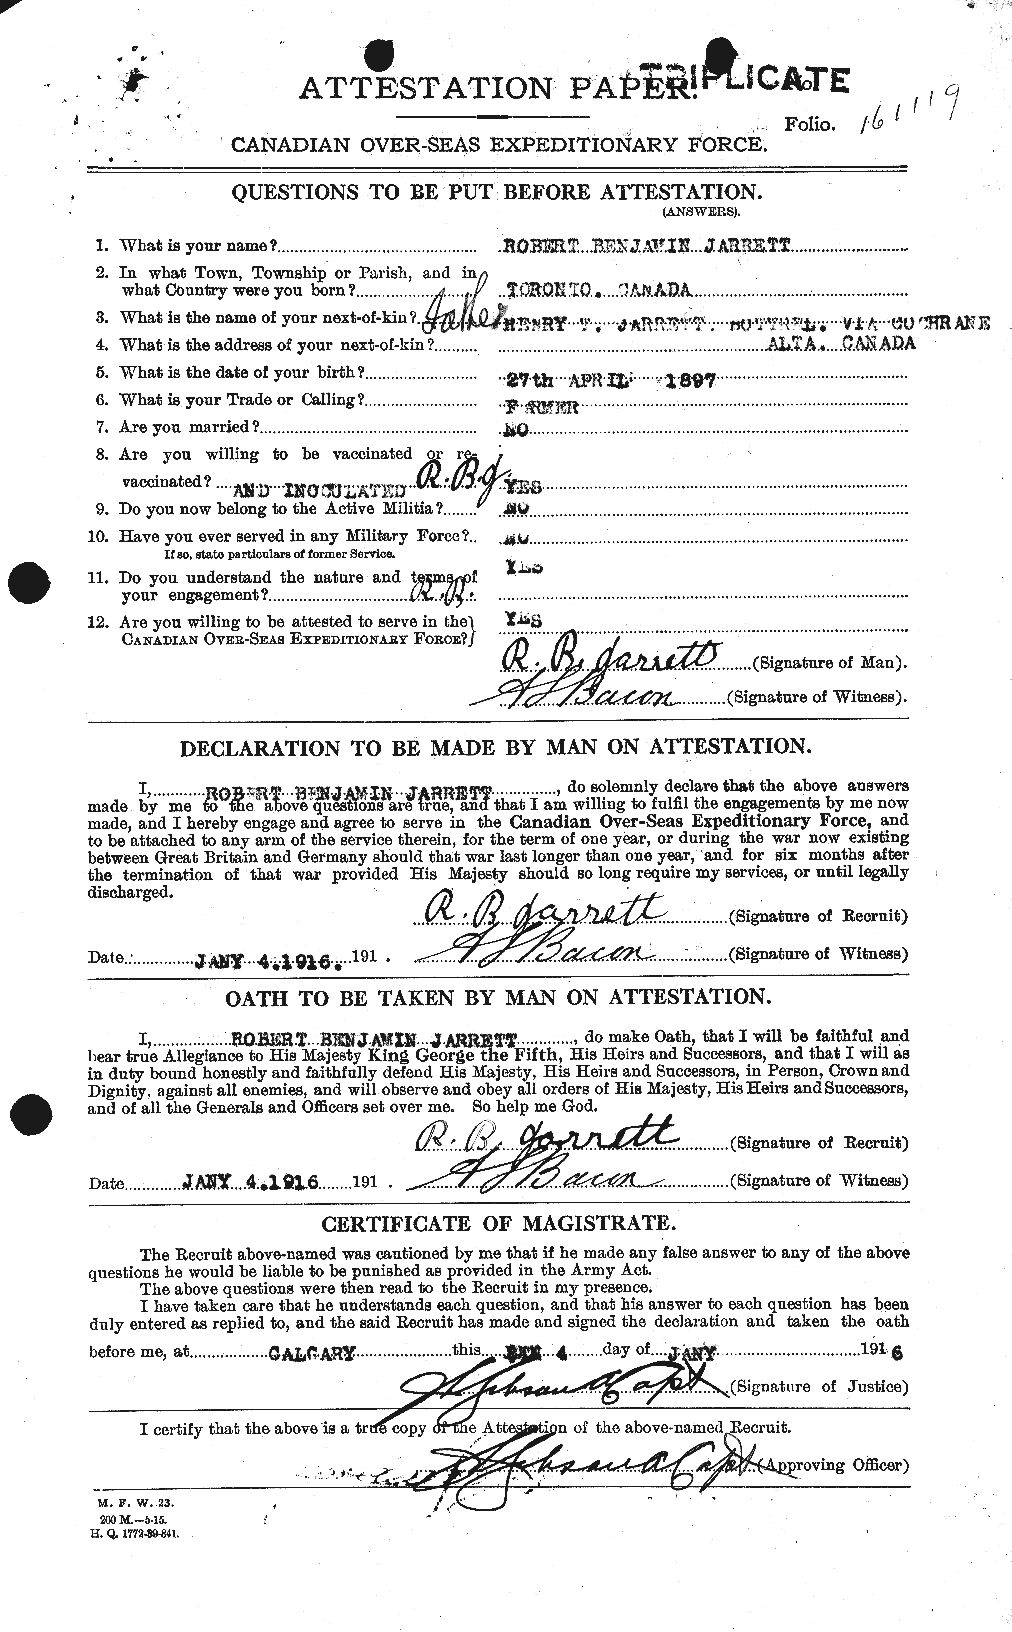 Personnel Records of the First World War - CEF 414576a